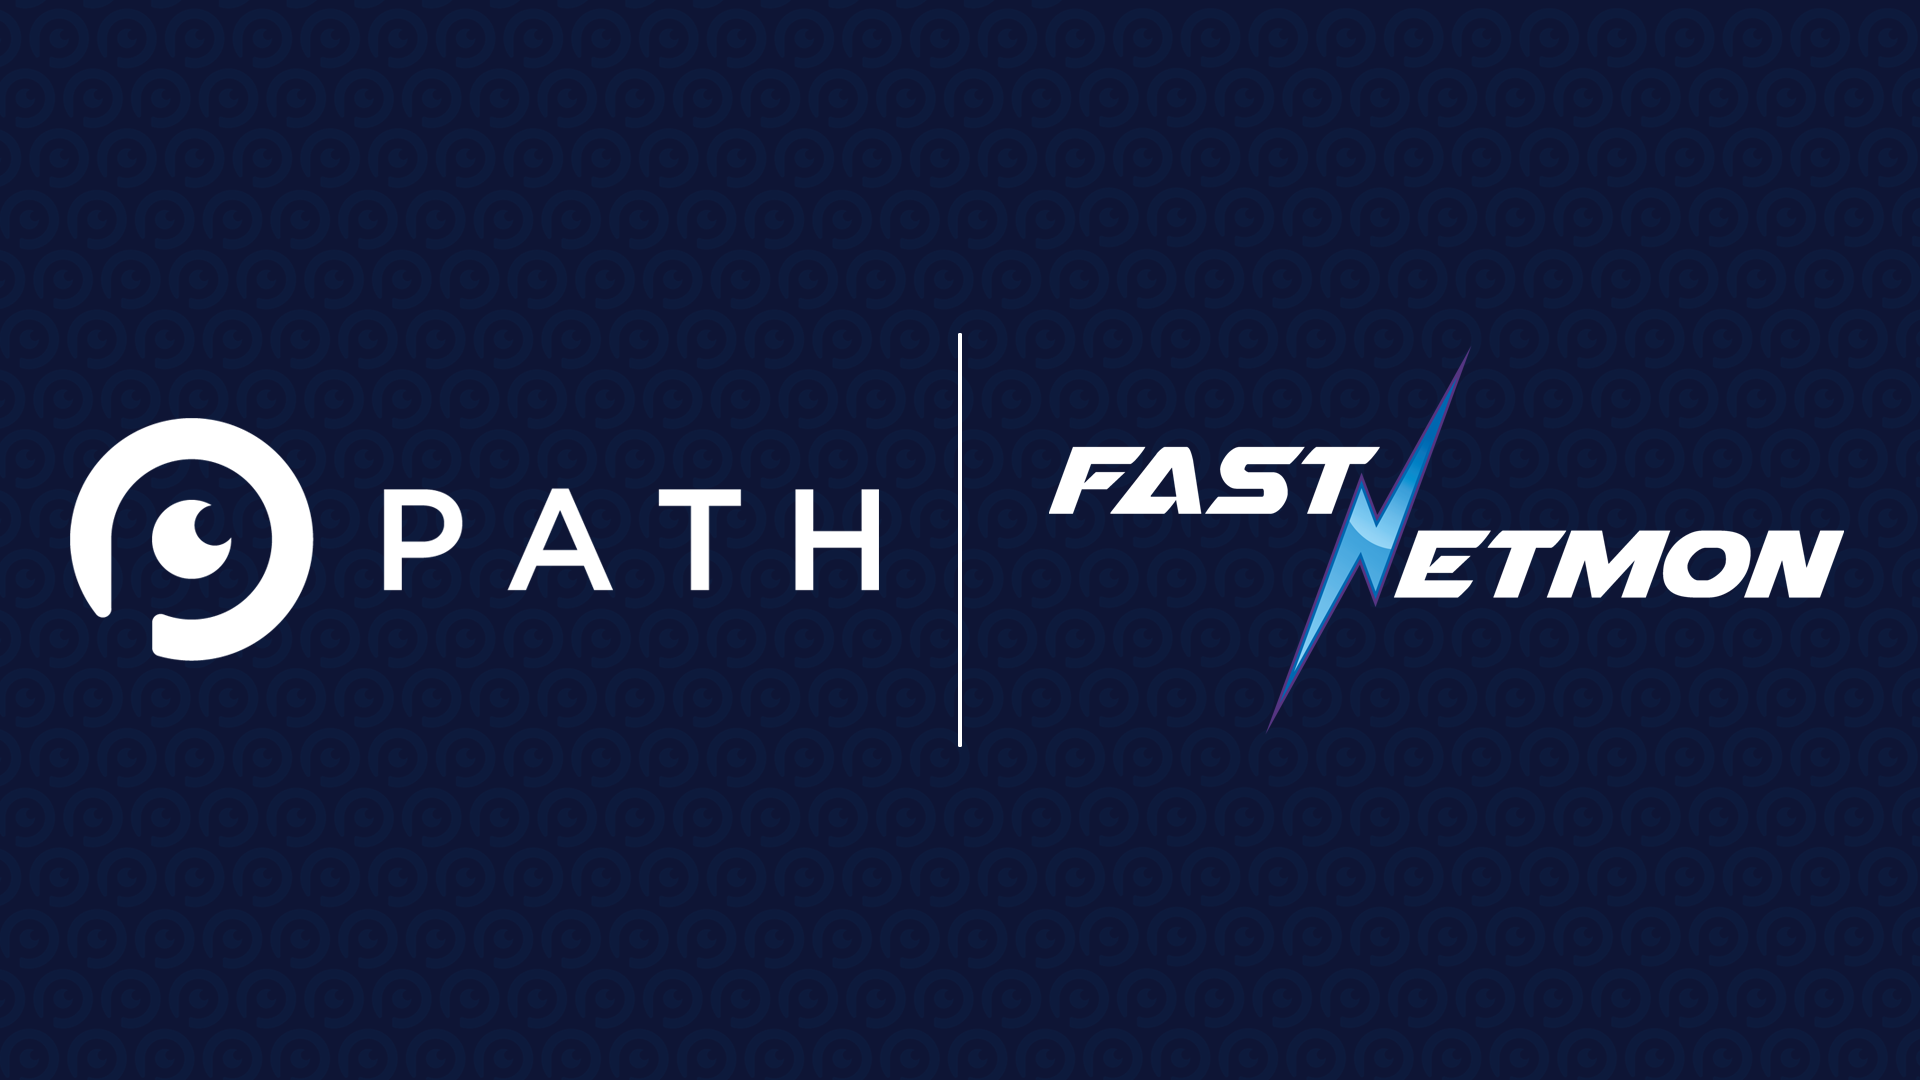 Path Network 12 Tbps cloud DDoS mitigation capacity is now available for FastNetMon customers